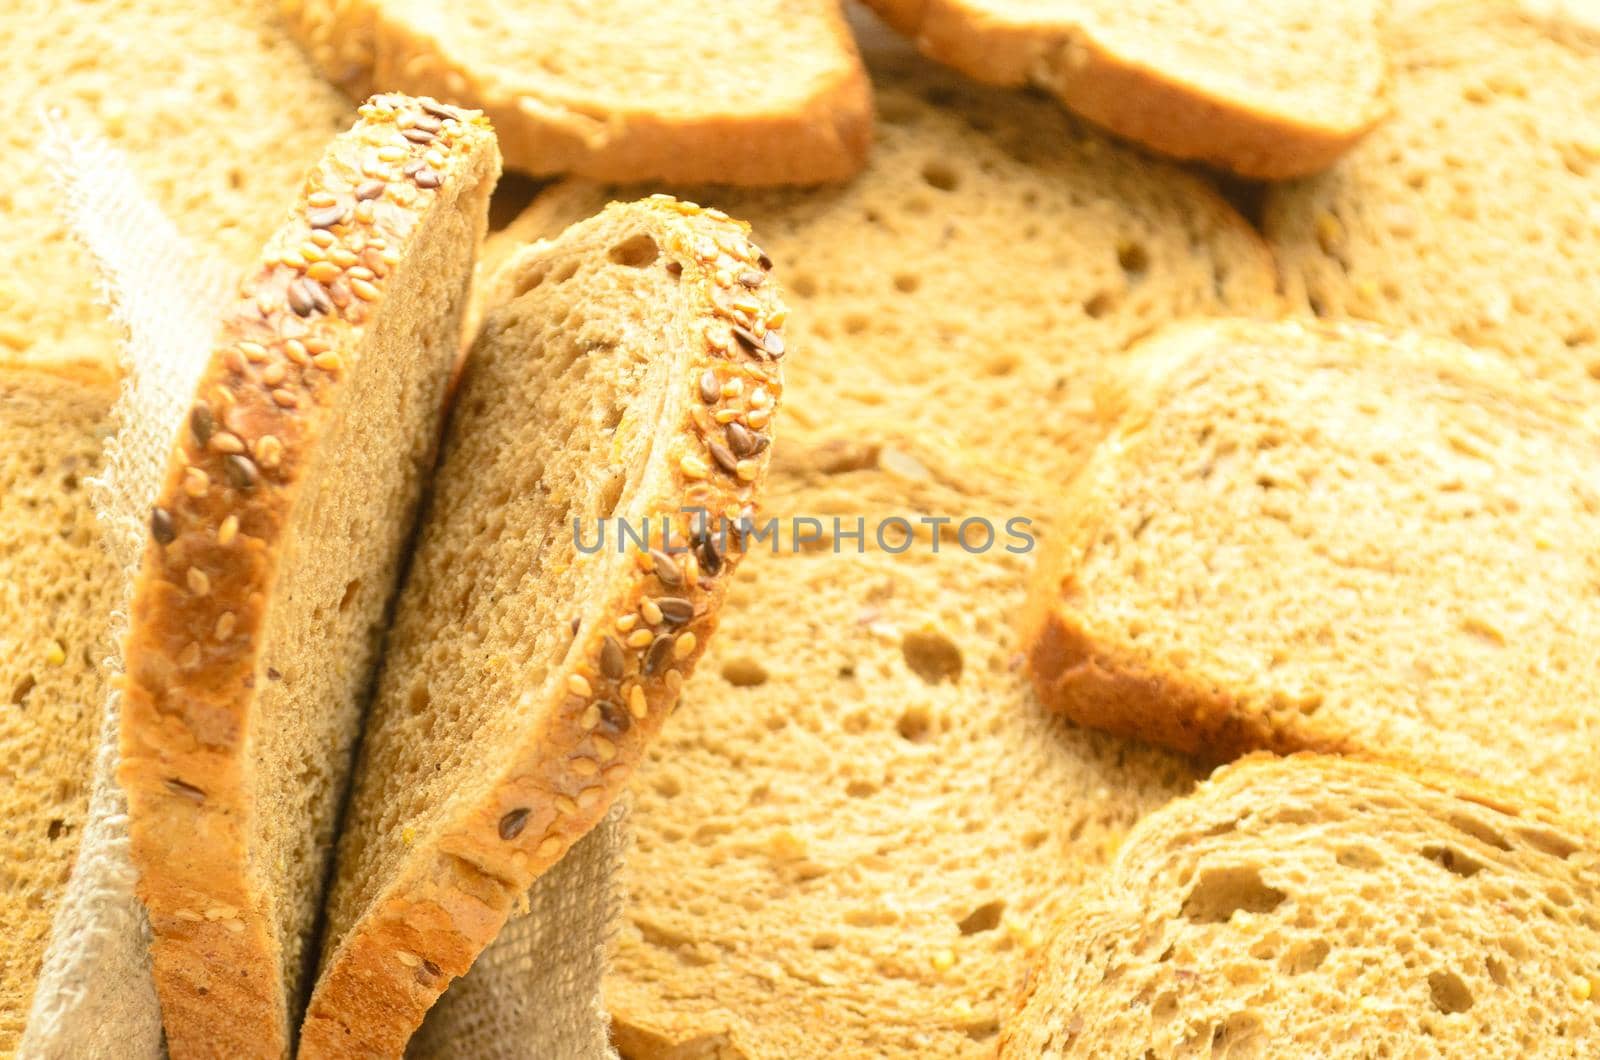 Two slices of cereal bread on bread background,copyspace.